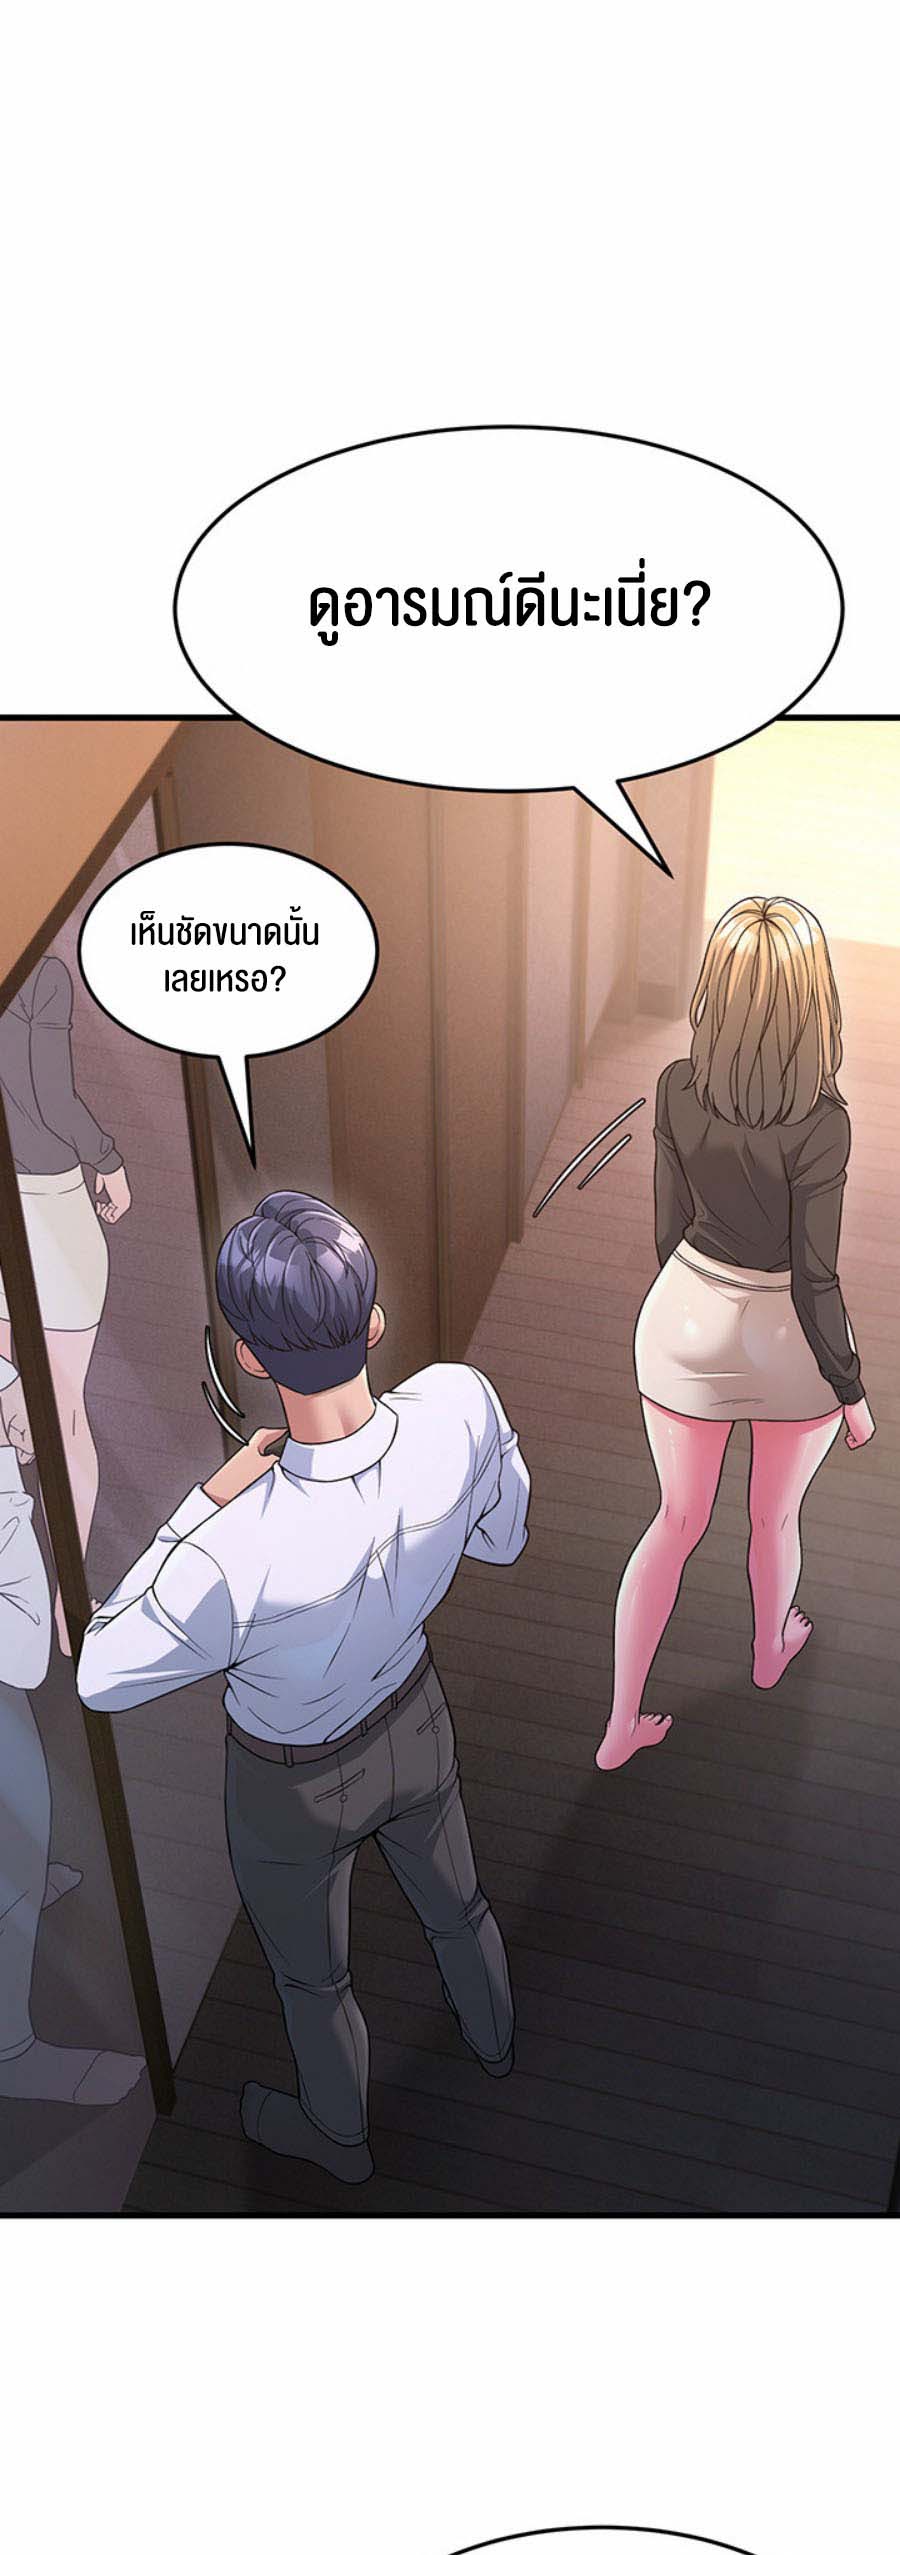 à¸­à¹ˆà¸²à¸™à¹‚à¸”à¸ˆà¸´à¸™ à¹€à¸£à¸·à¹ˆà¸­à¸‡ Mother in Law Bends To My Will 8 15